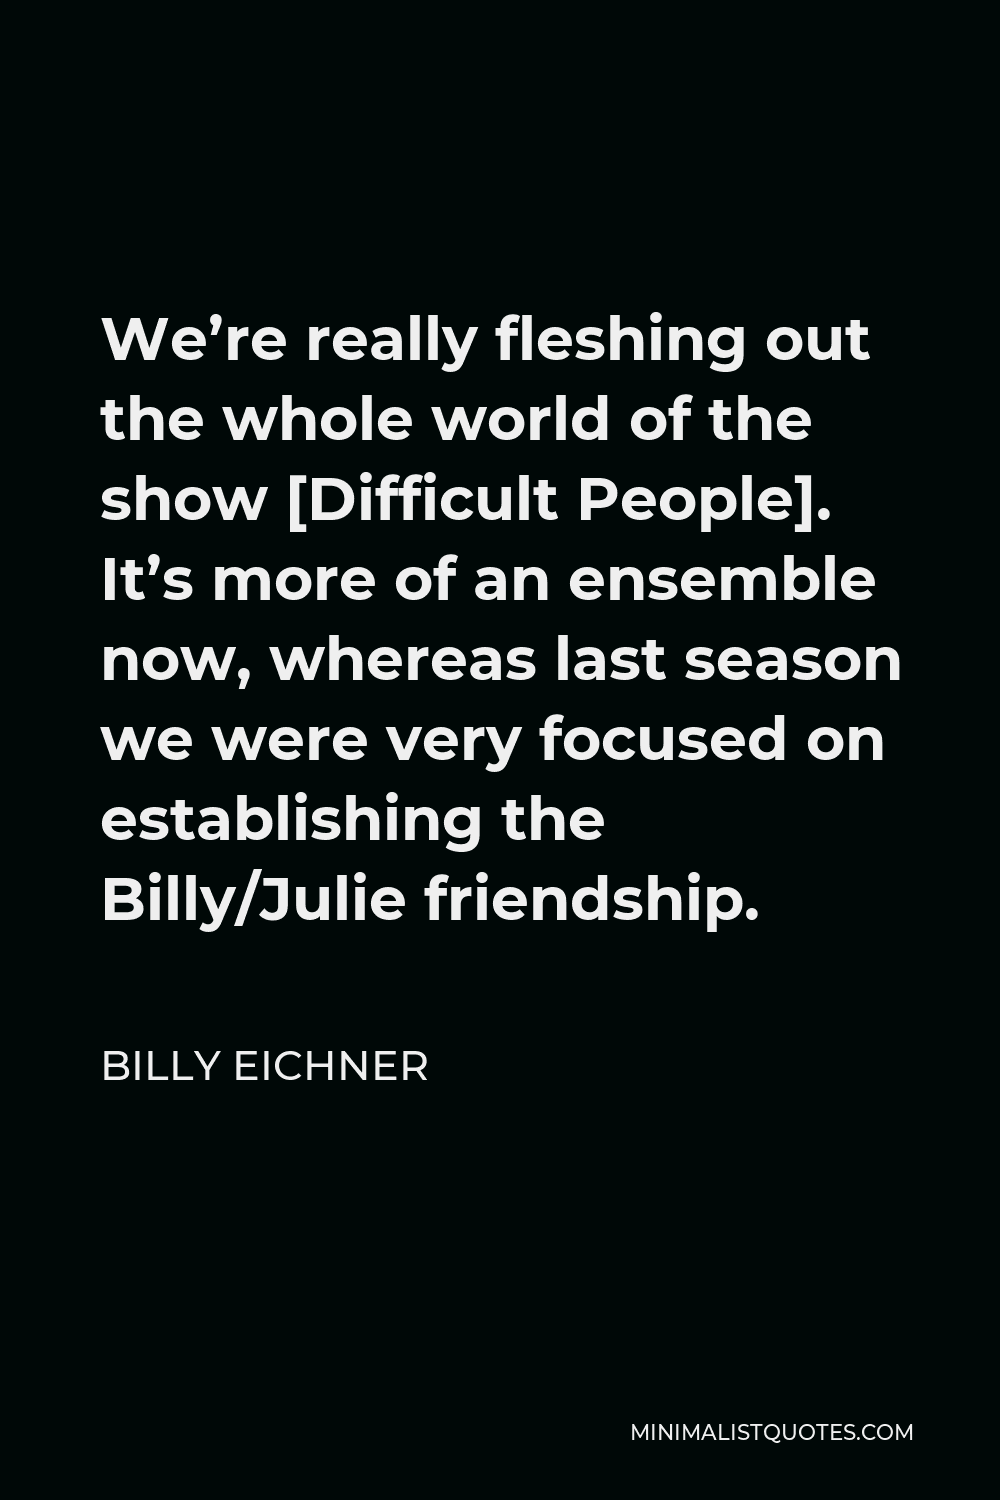 Billy Eichner Quote - We’re really fleshing out the whole world of the show [Difficult People]. It’s more of an ensemble now, whereas last season we were very focused on establishing the Billy/Julie friendship.